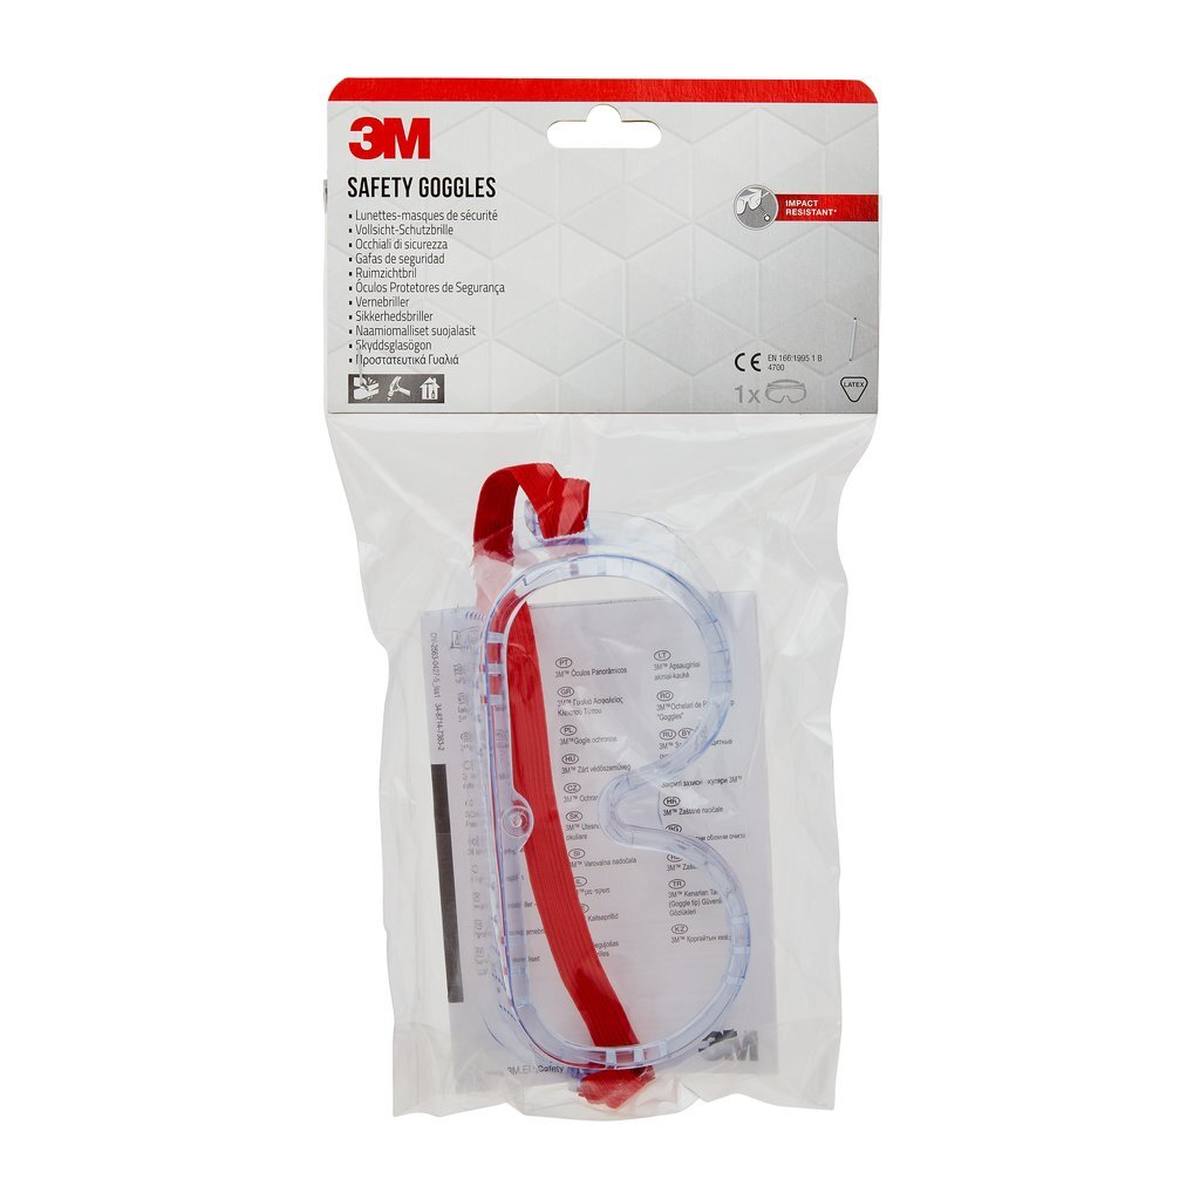 3M Full-vision safety spectacles 4700, clear